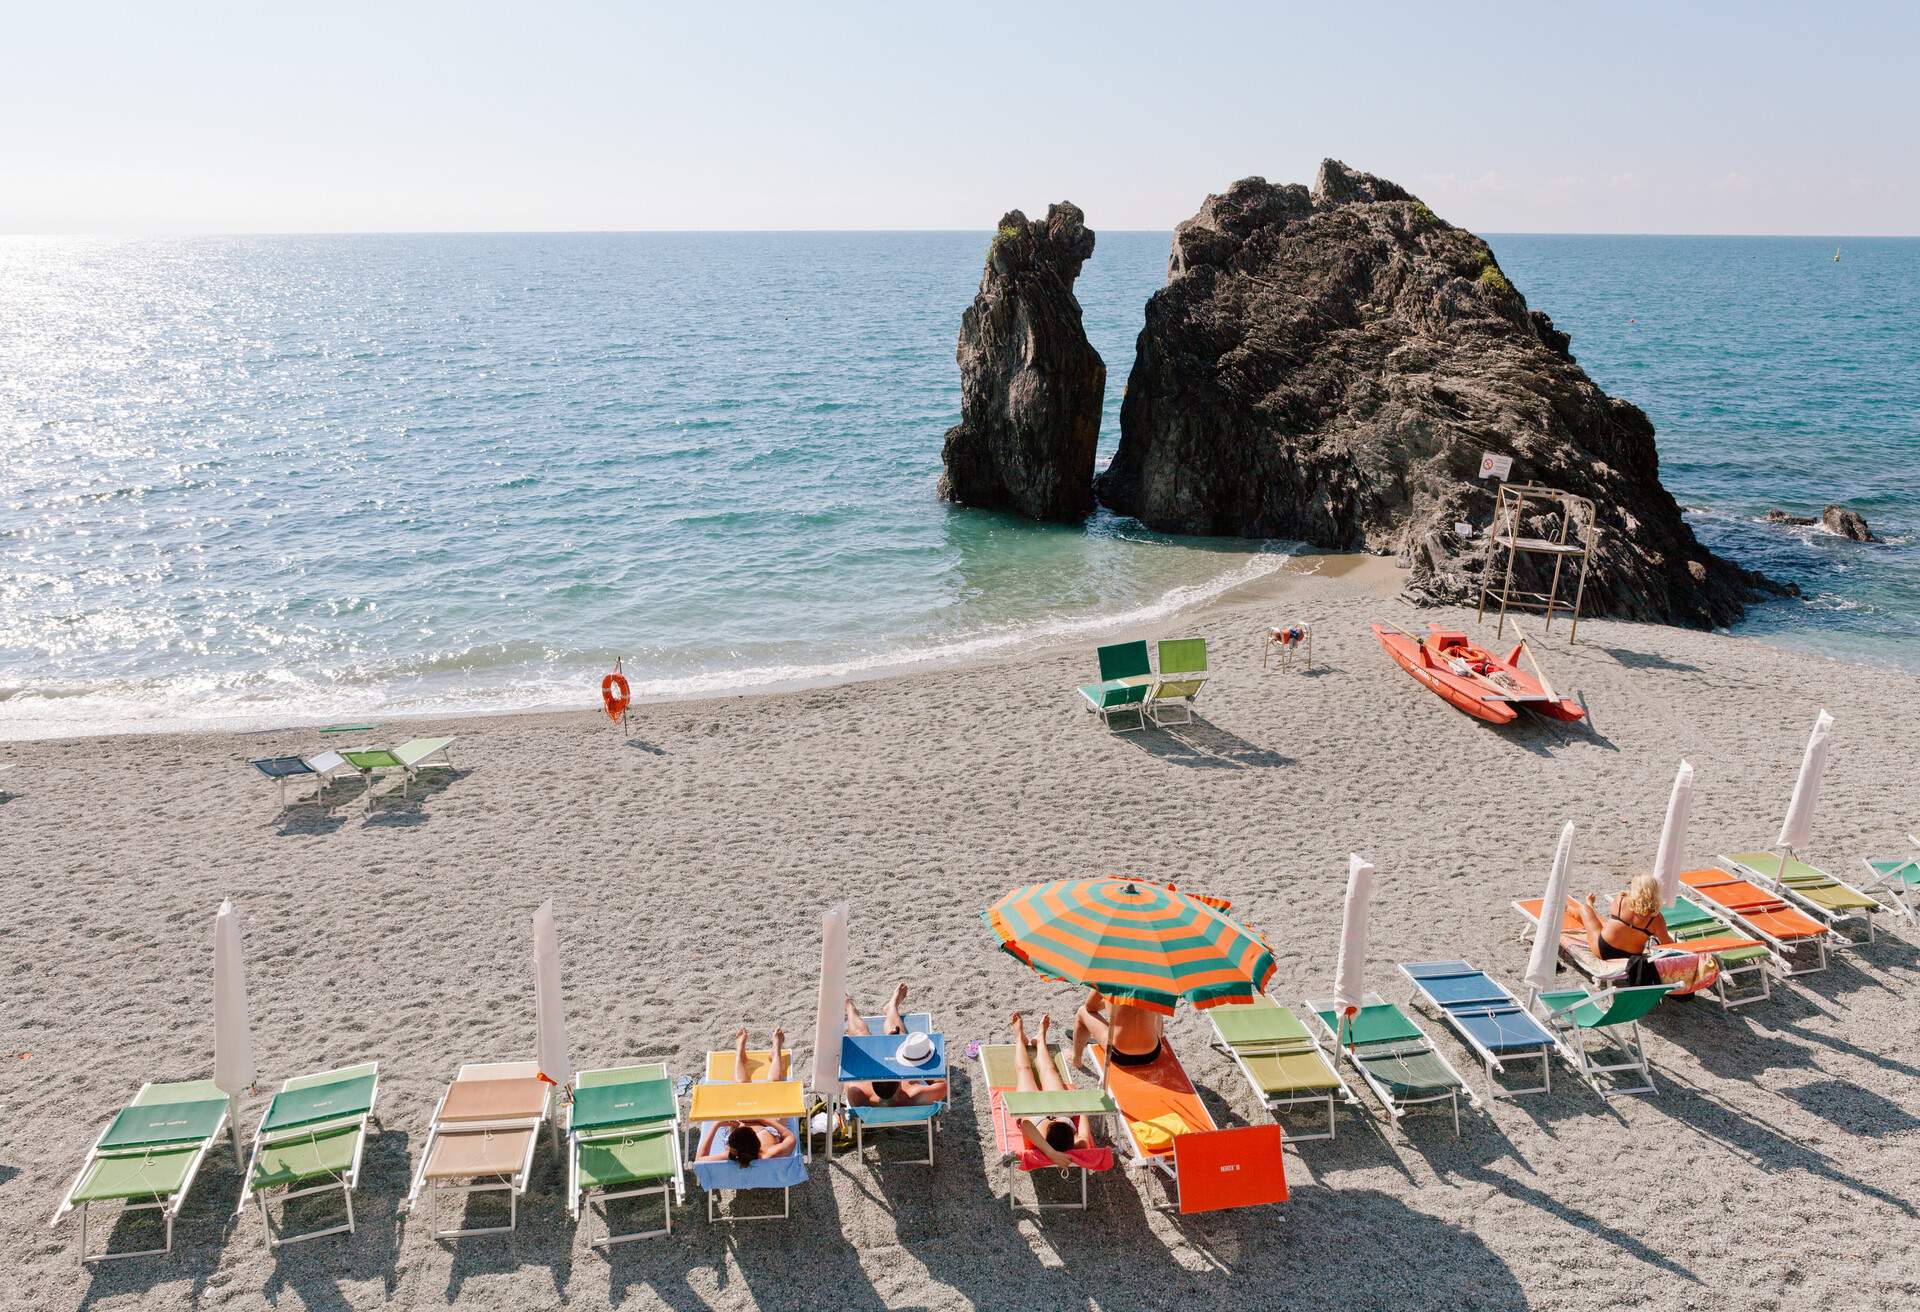 vacation beach with colorful rainbow chaise lounge chairs and umbrellas. resort beach. Monterosso, Cinque Terra, Italy. old fishing village and tourist destination